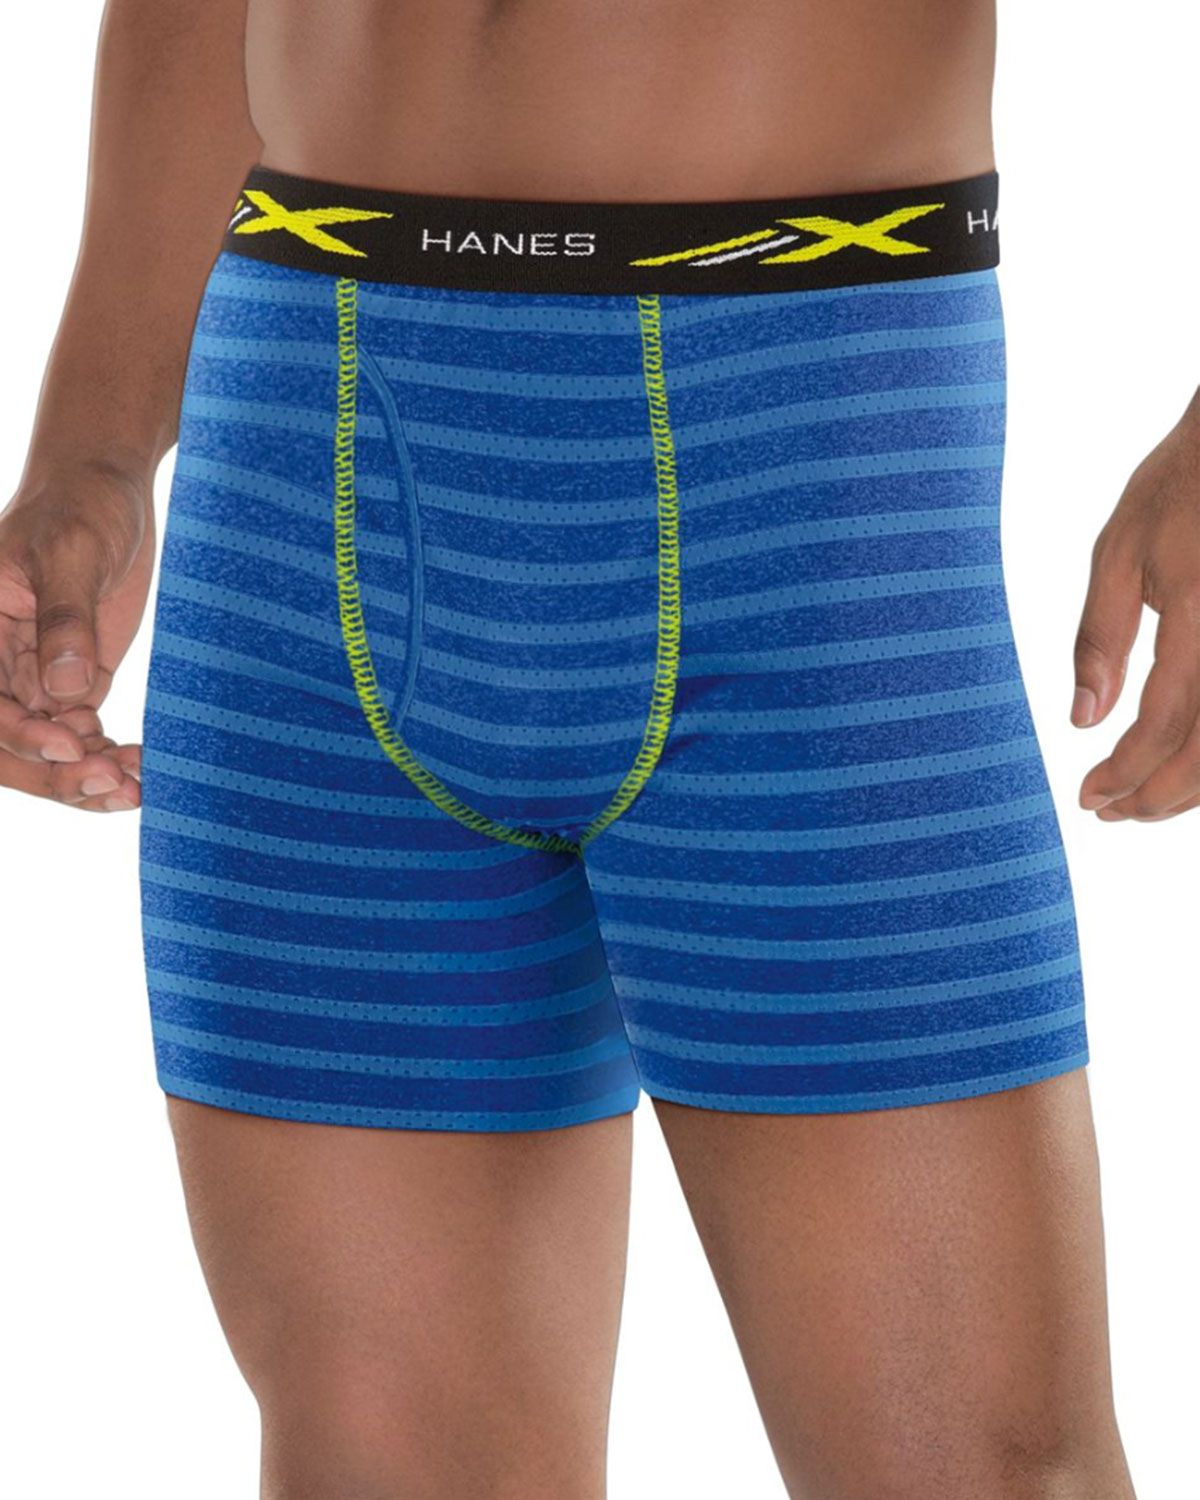 UPC 738994832528 product image for Hanes XTMCP4 Men's X-Temp Mesh Performance Boxer Briefs 4-Pack - Assorted - M | upcitemdb.com